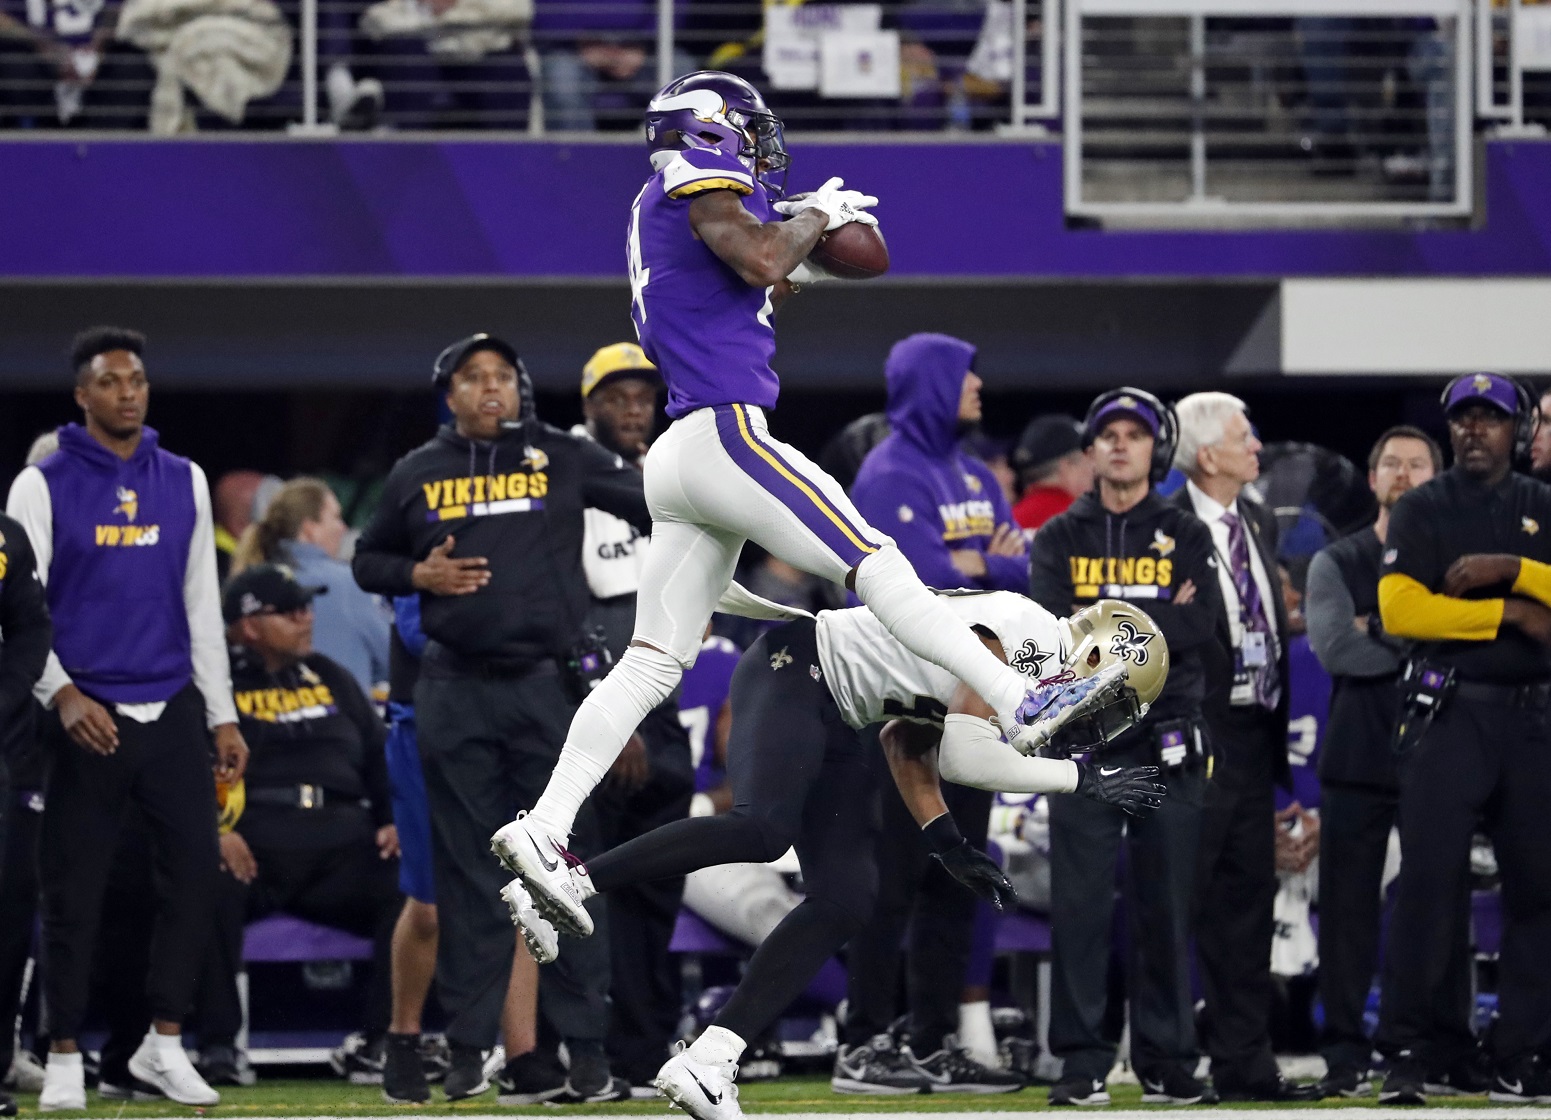 Vikings WR Diggs ‘trying to work through’ dissatisfaction